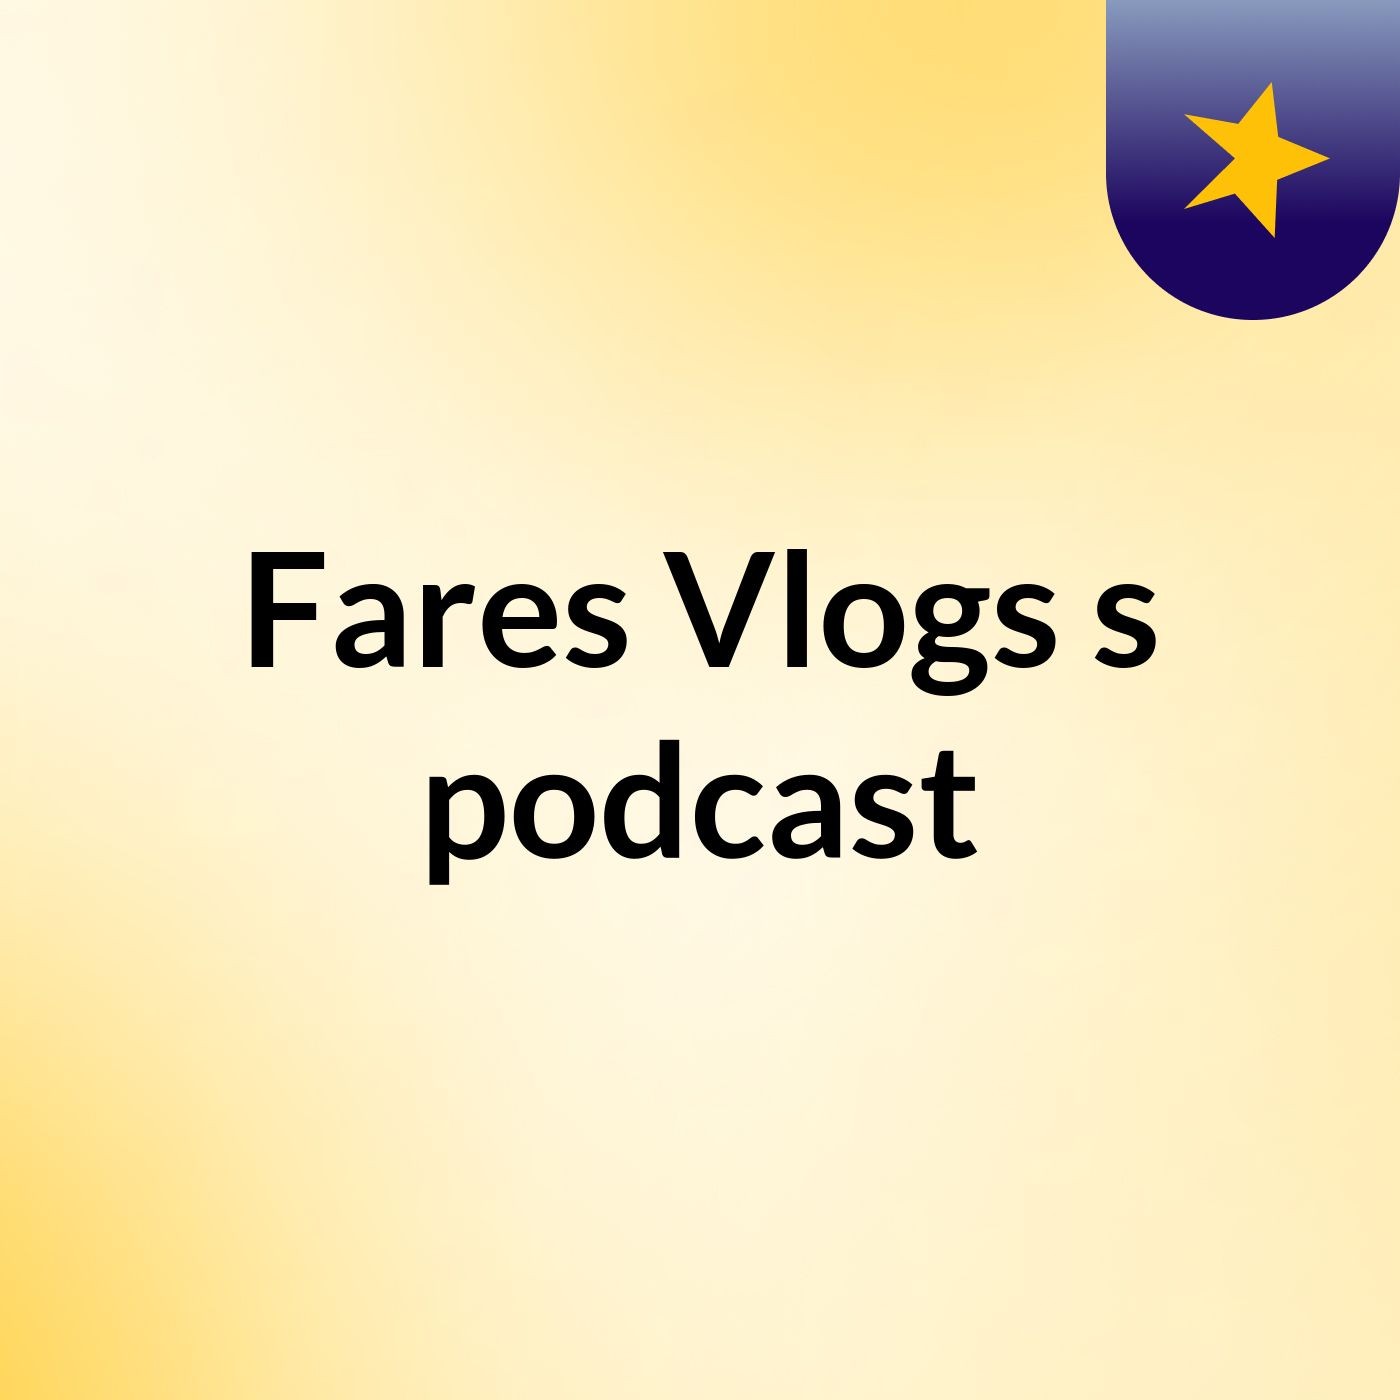 Fares Vlogs's podcast